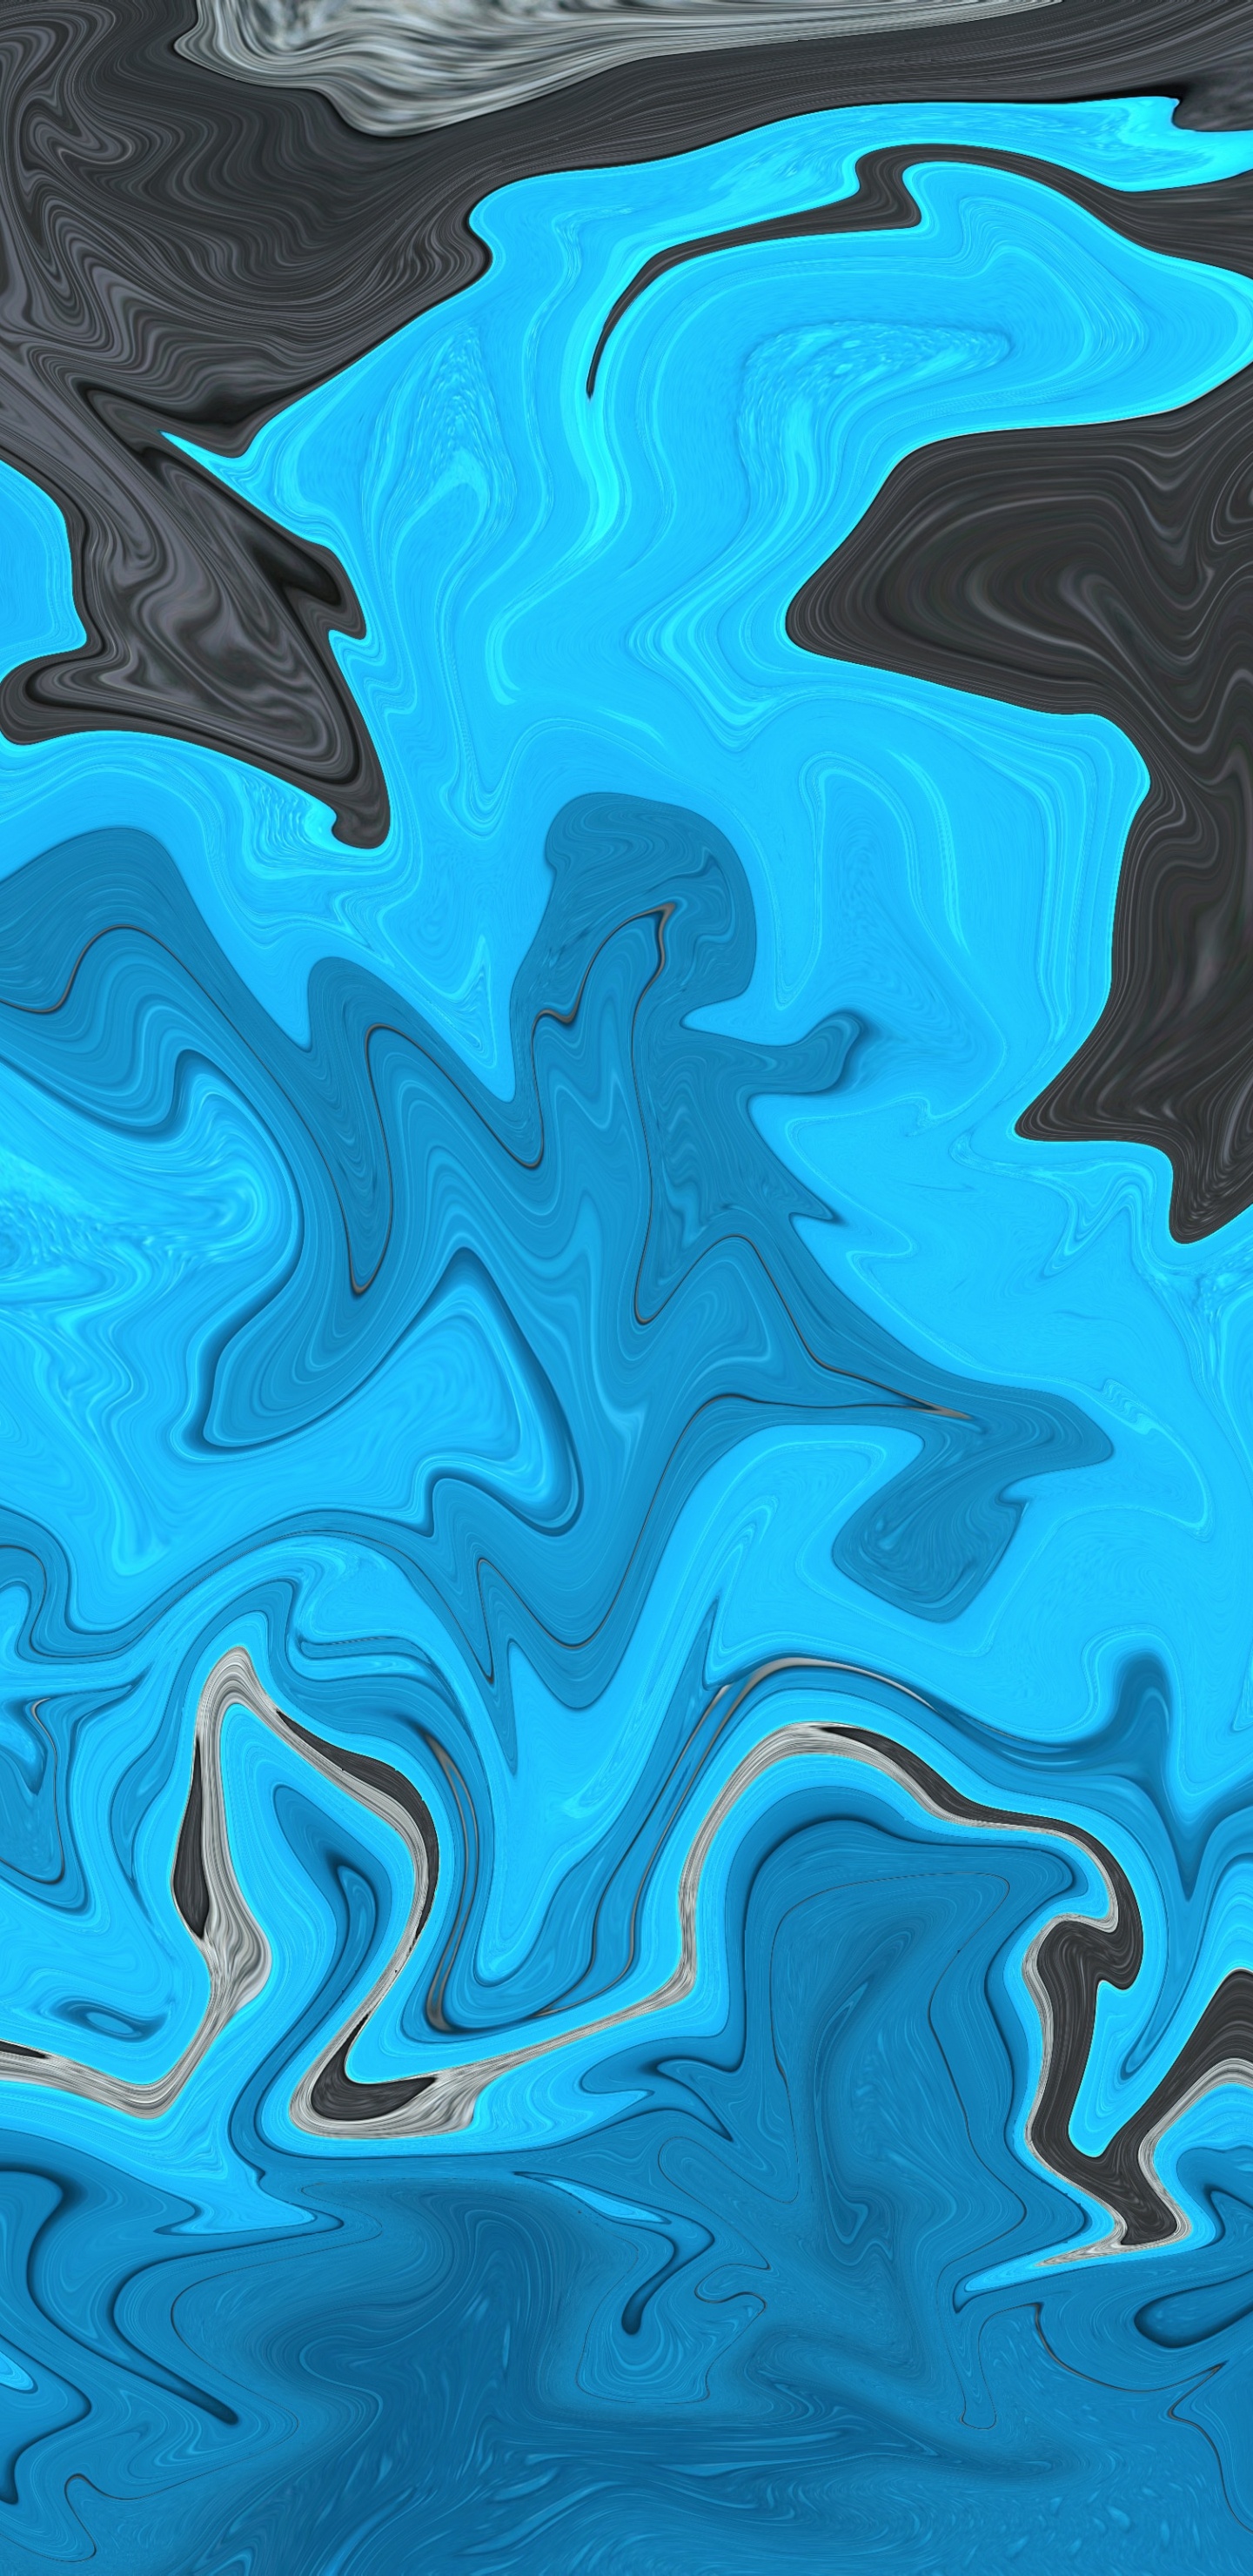 Blue and Black Abstract Painting. Wallpaper in 1440x2960 Resolution